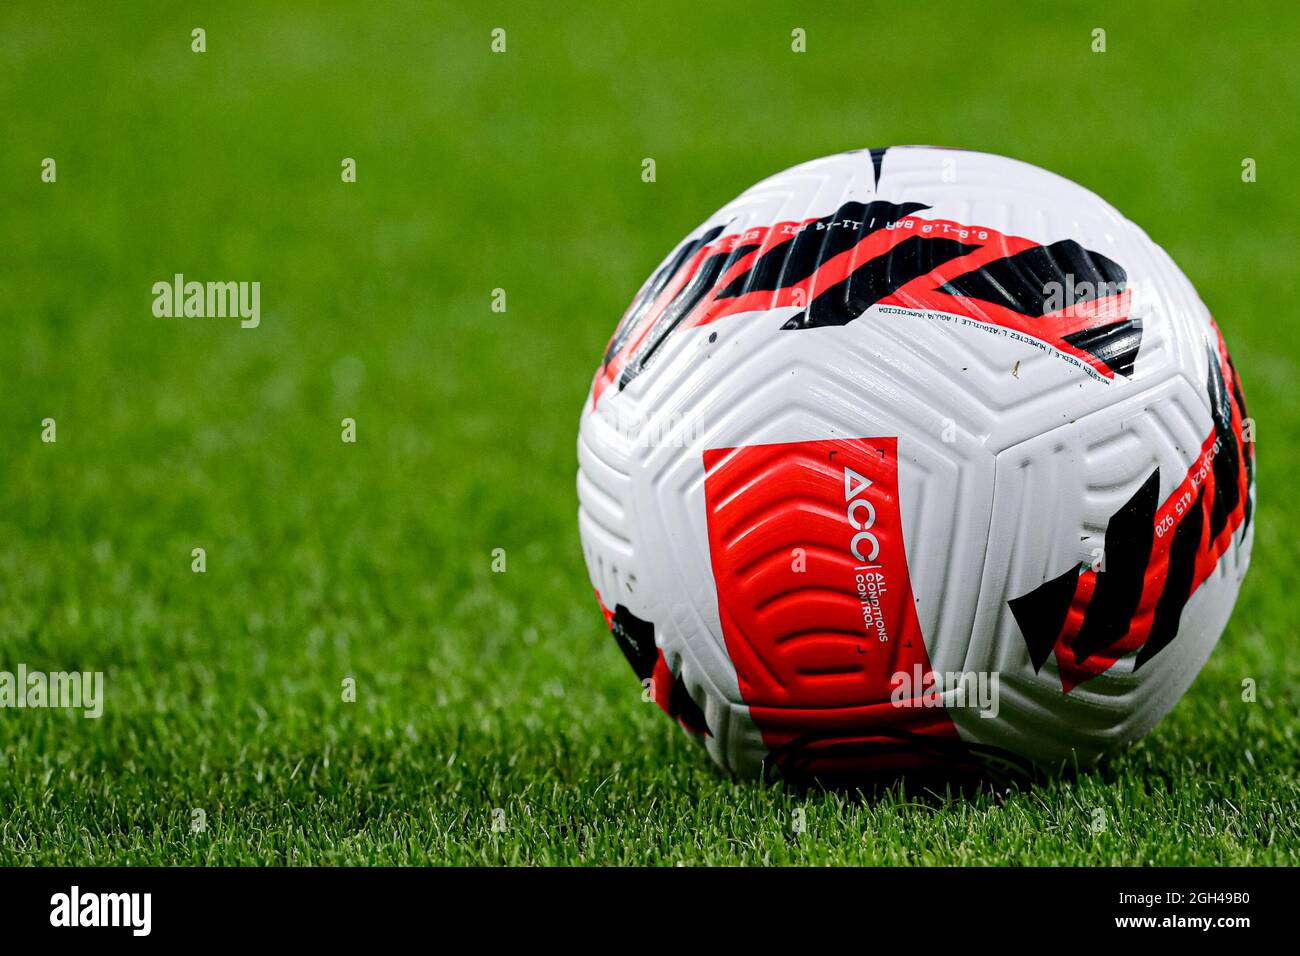 EINDHOVEN, NETHERLANDS - SEPTEMBER 4: Detailed view of a Nike match ball  during the 2022 FIFA World Cup Qualifier match between Netherlands and  Montenegro at the Philips Stadion on September 4, 2021